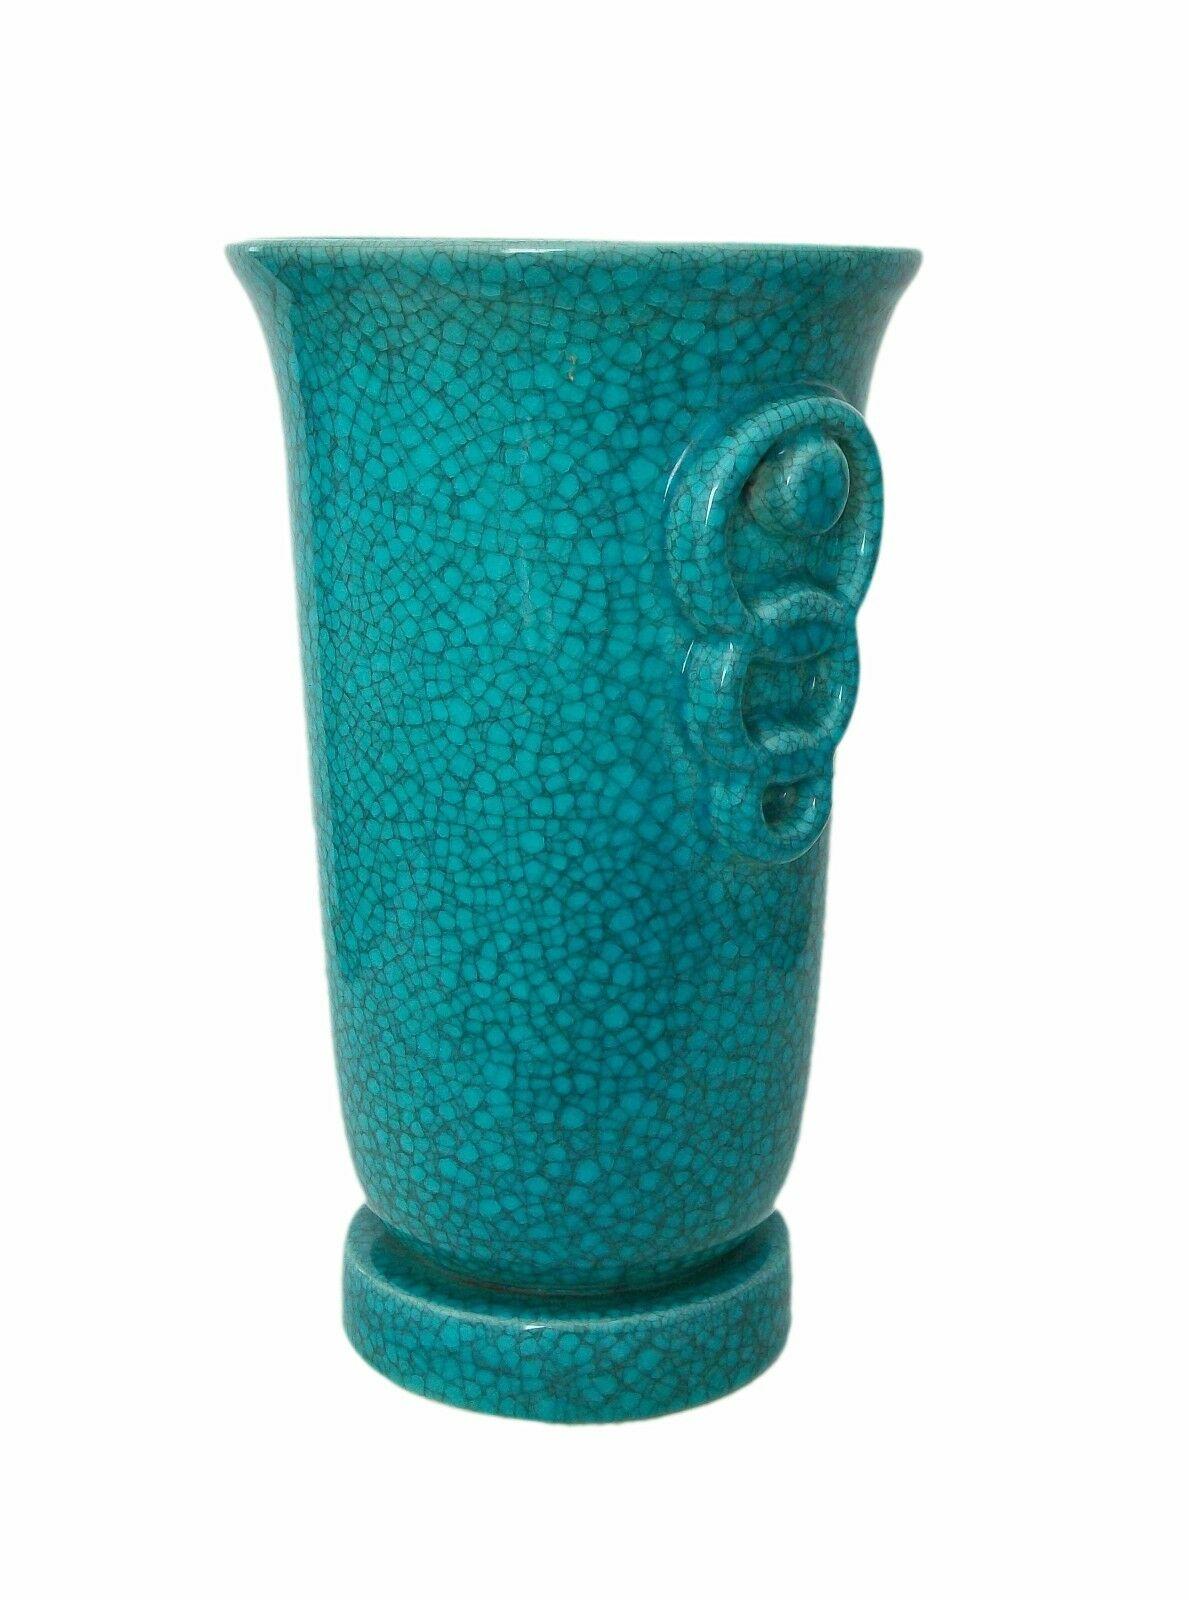 Extraordinary Art Deco turquoise crackle glaze vase - featuring a trumpet form shape on a plinth base with twin handles - signed on the base (model number 1344-O) - Belgium - circa 1930's.

Excellent/mint antique condition - no loss - no damage -